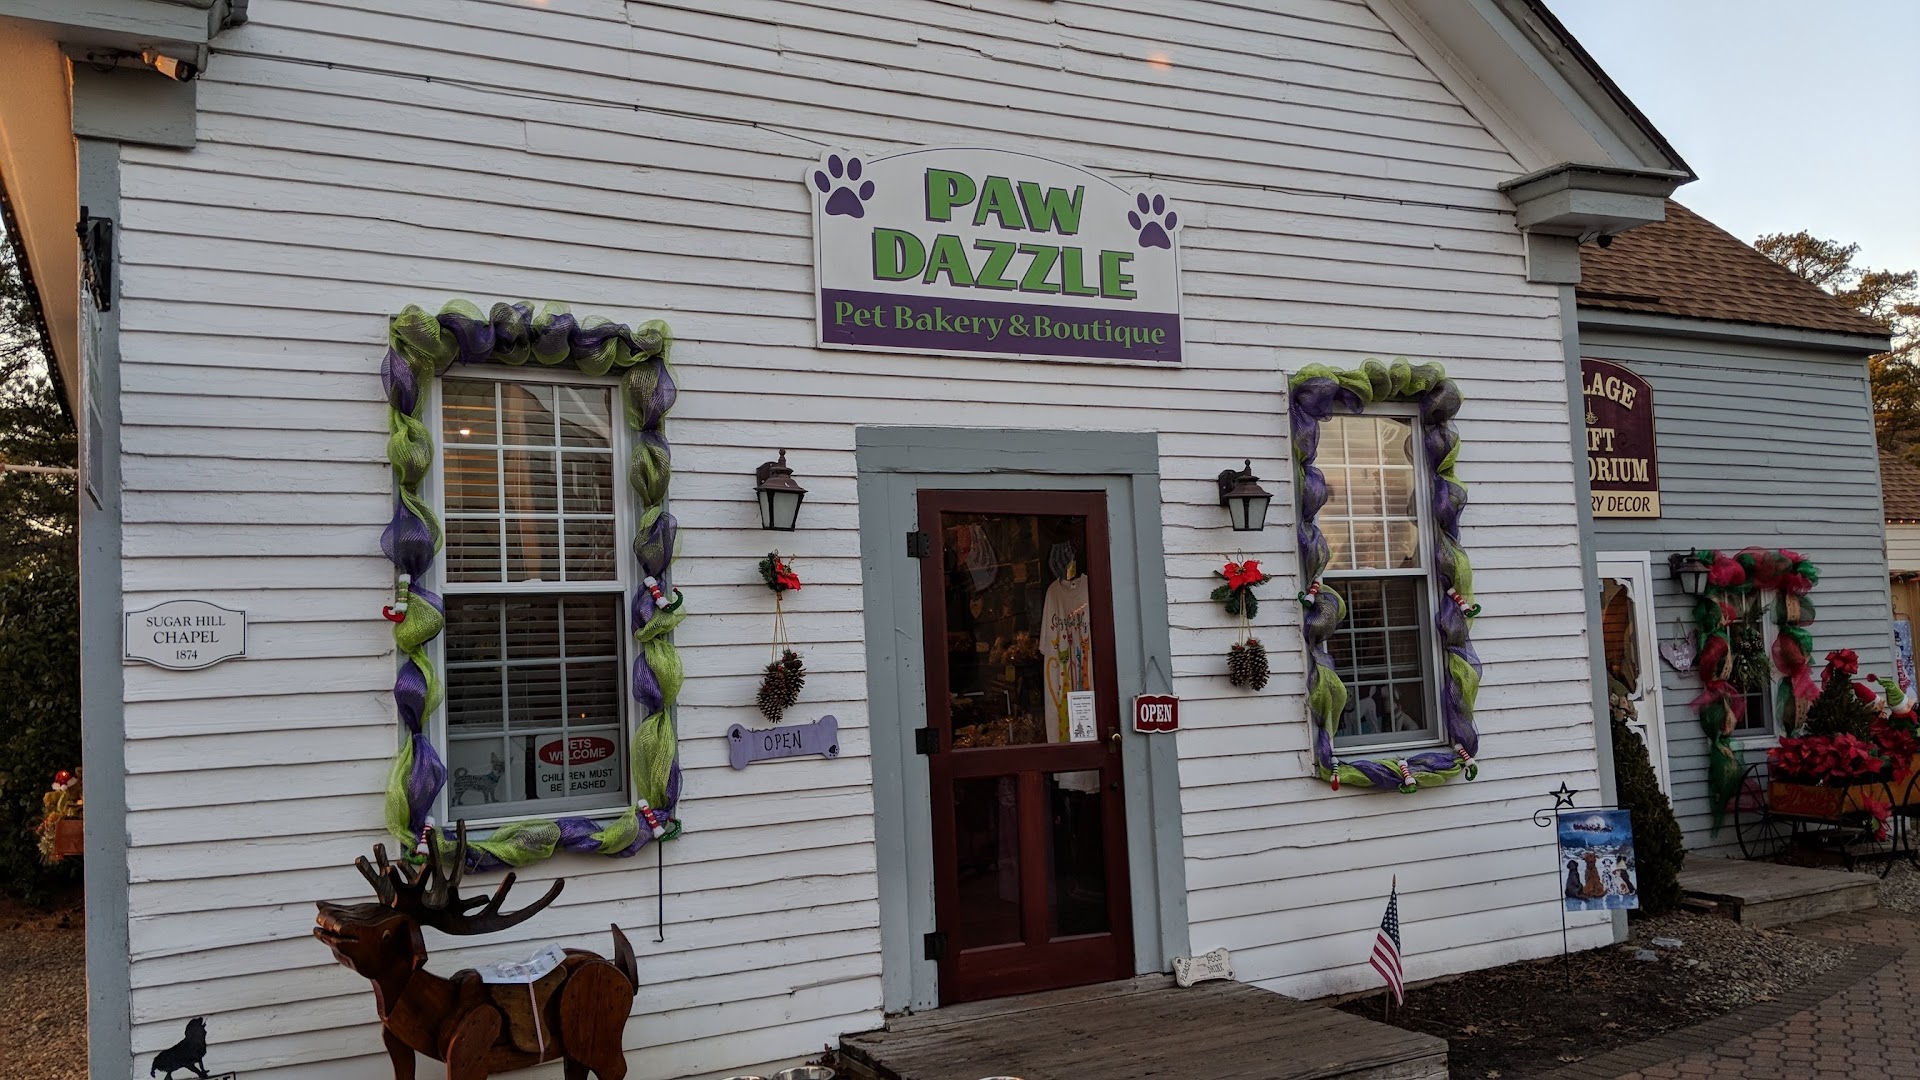 Paw Dazzle Pet Bakery and Boutique